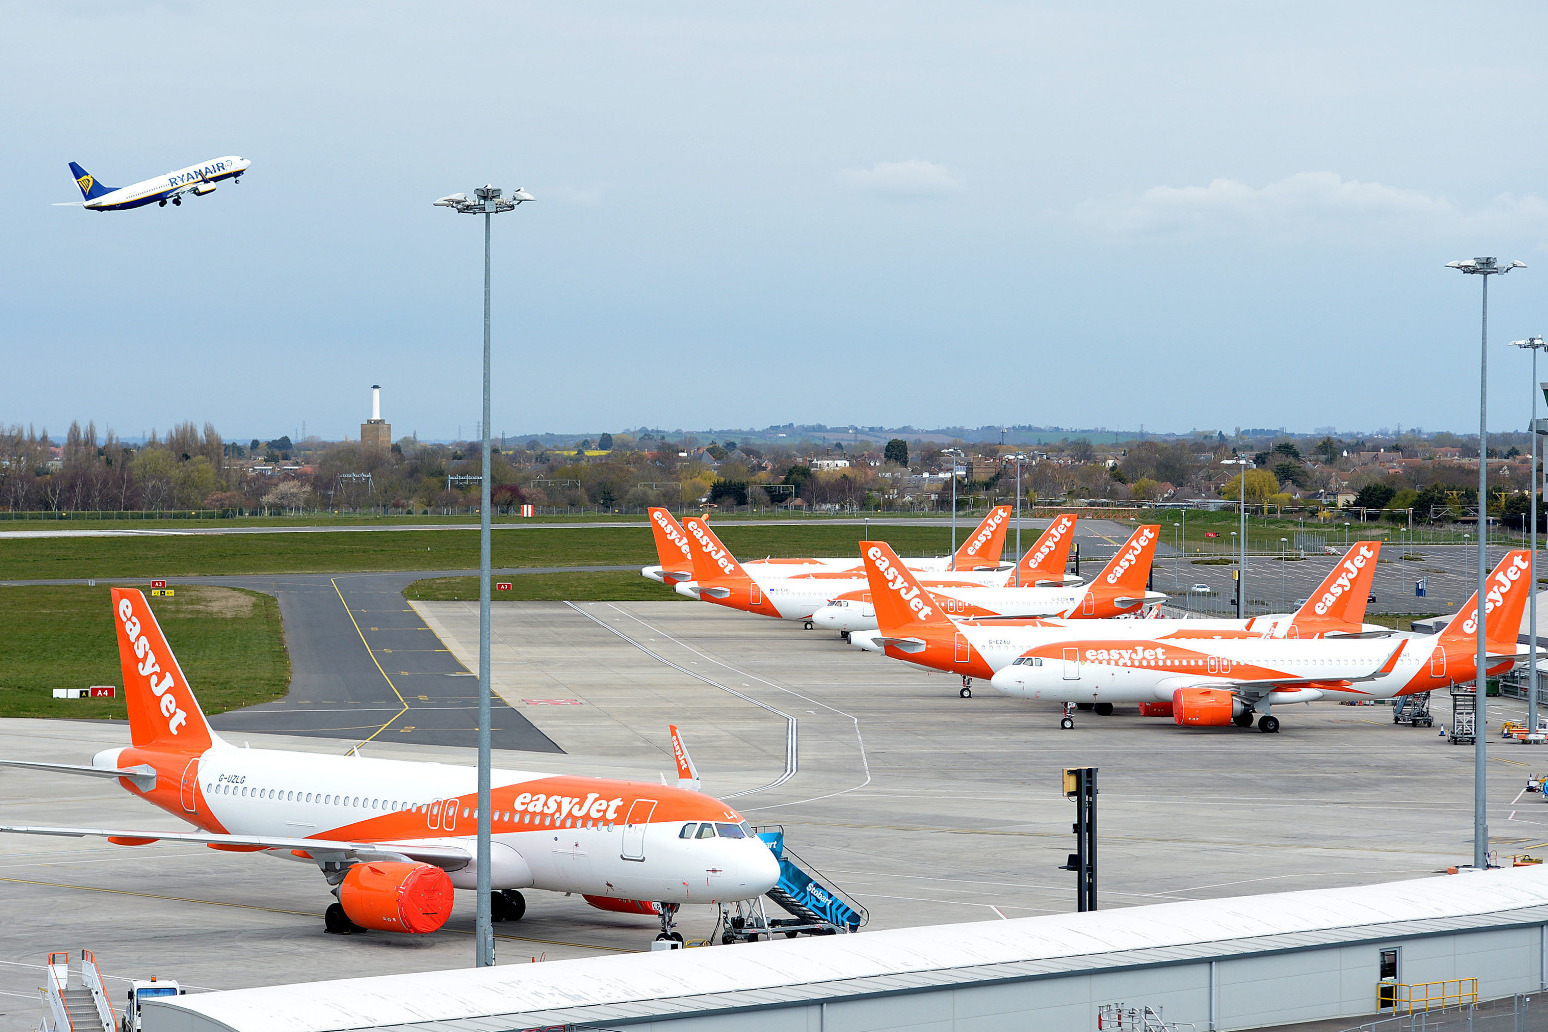 Easyjet to hold general meeting to discuss plans 